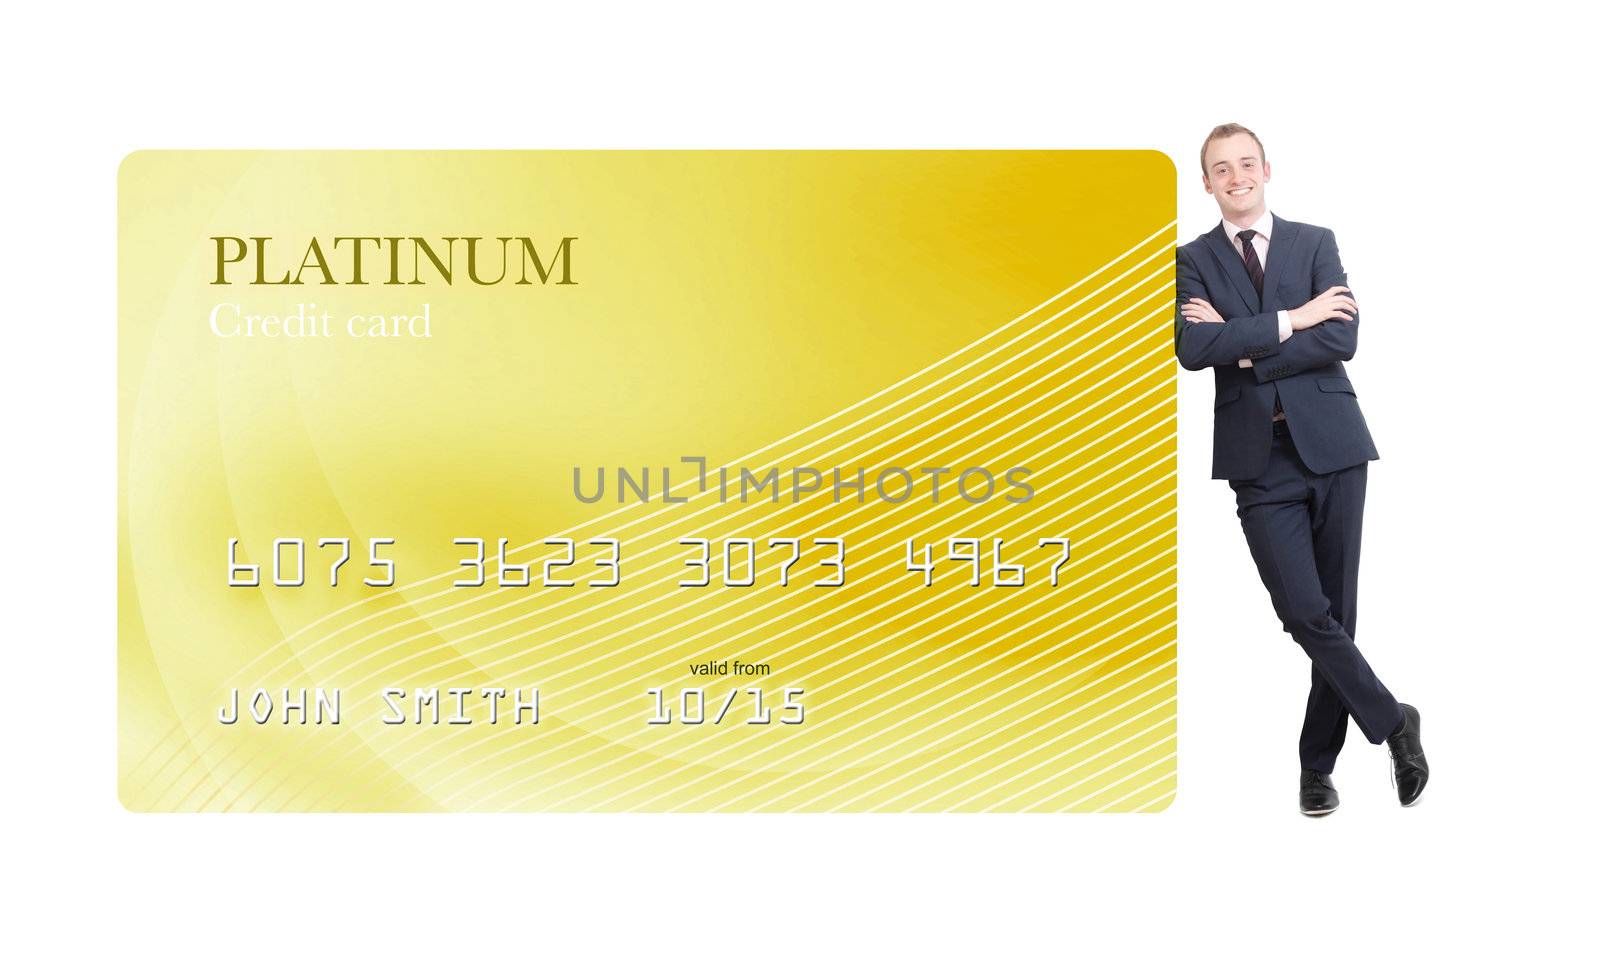 Businessman leaning on credit card